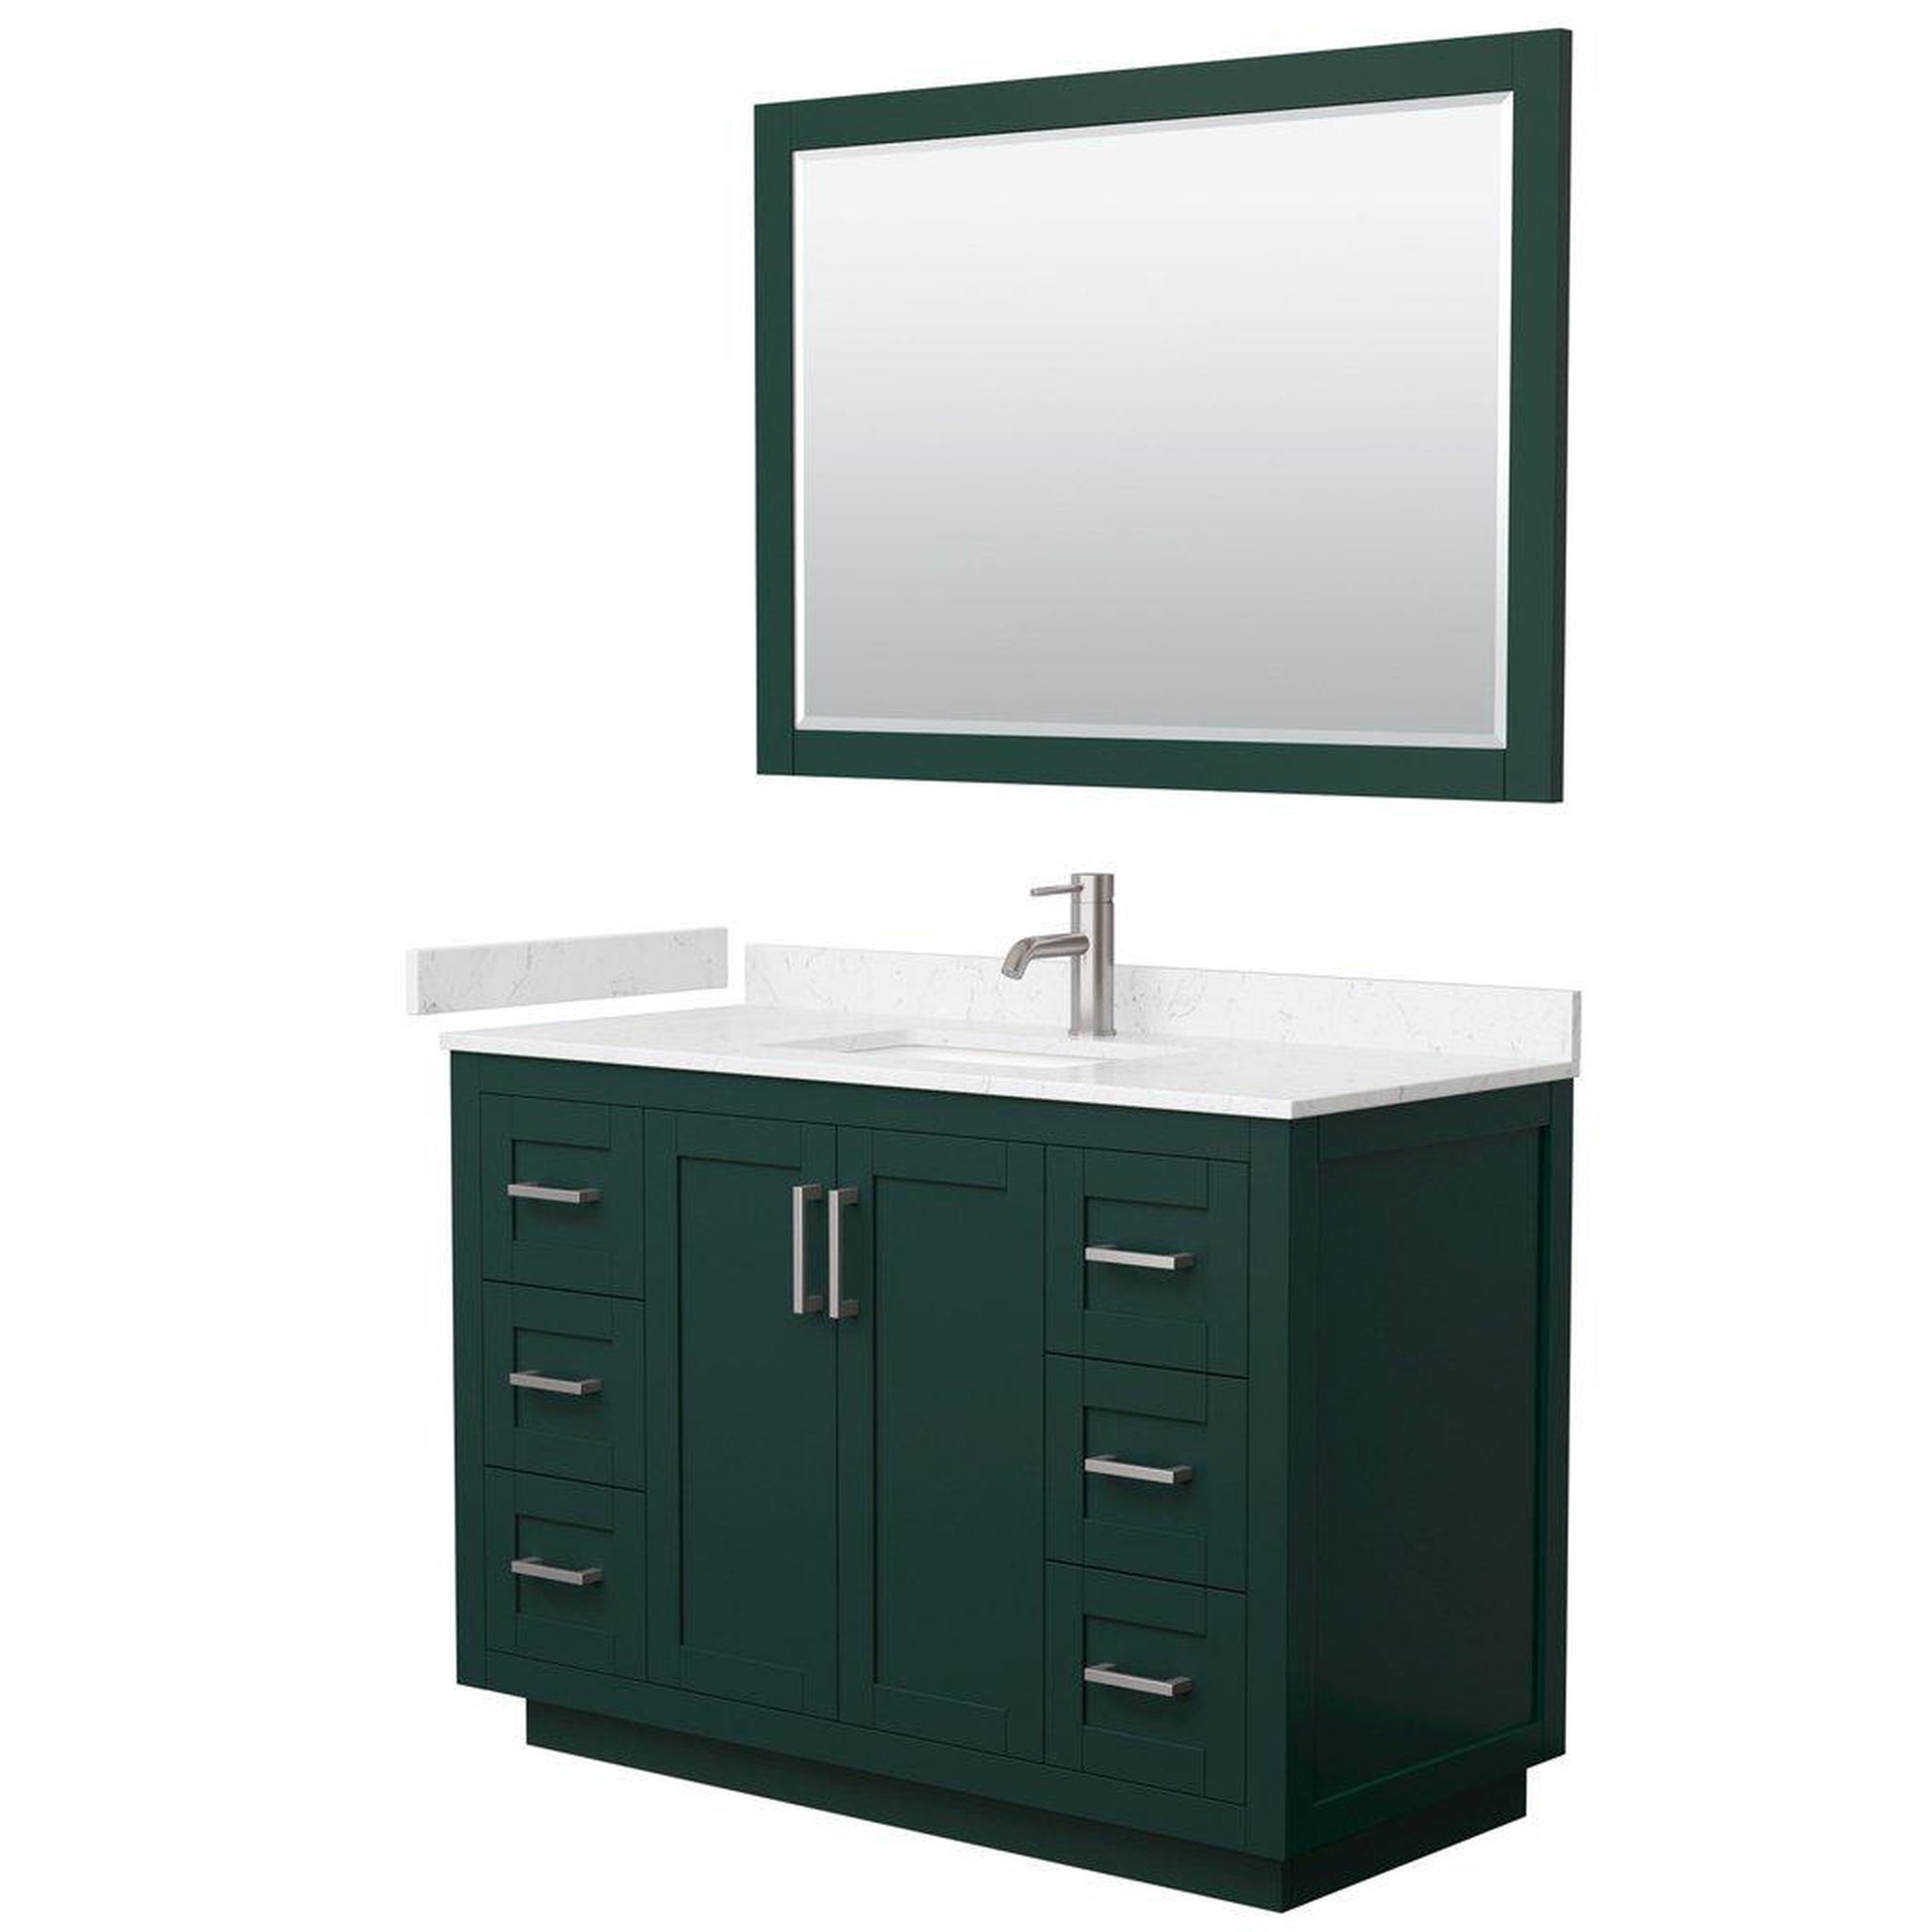 Wyndham Collection Miranda 48" Single Bathroom Green Vanity Set With Light-Vein Carrara Cultured Marble Countertop, Undermount Square Sink, 46" Mirror And Brushed Nickel Trim